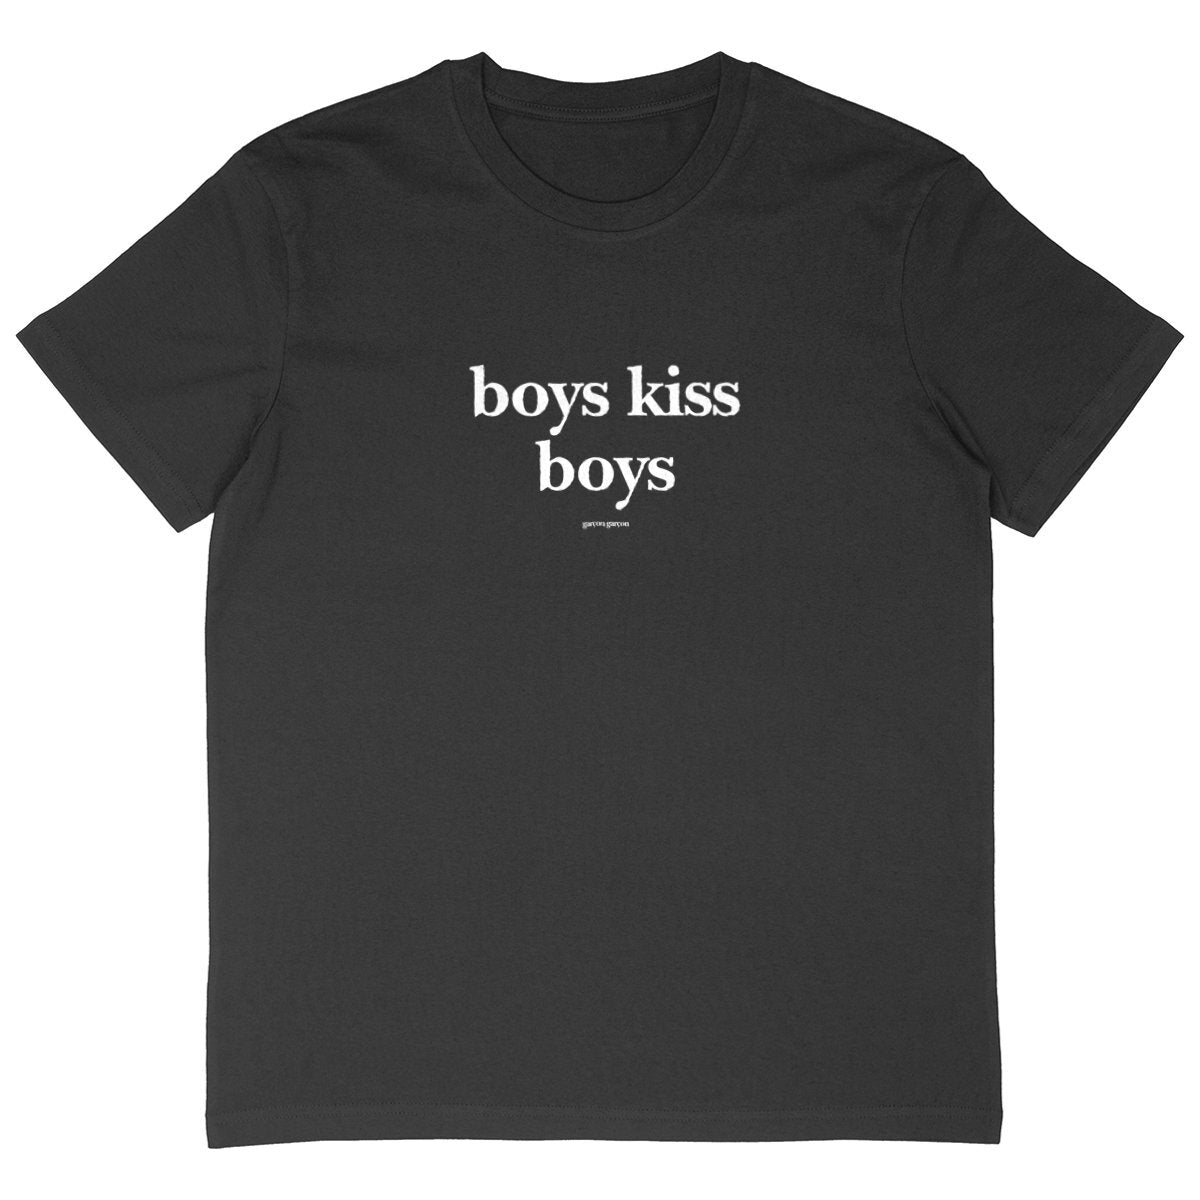 boys kiss boys BLACK tee oversized.garçon garçon tee oversize BLACK. Dive into the essence of Parisian cool with this oversized tee. The subtle 'garçon garçon' signature whispers a chic narrative, offering a slice of the city's famed elegance. Perfect for those who speak style with simplicity.